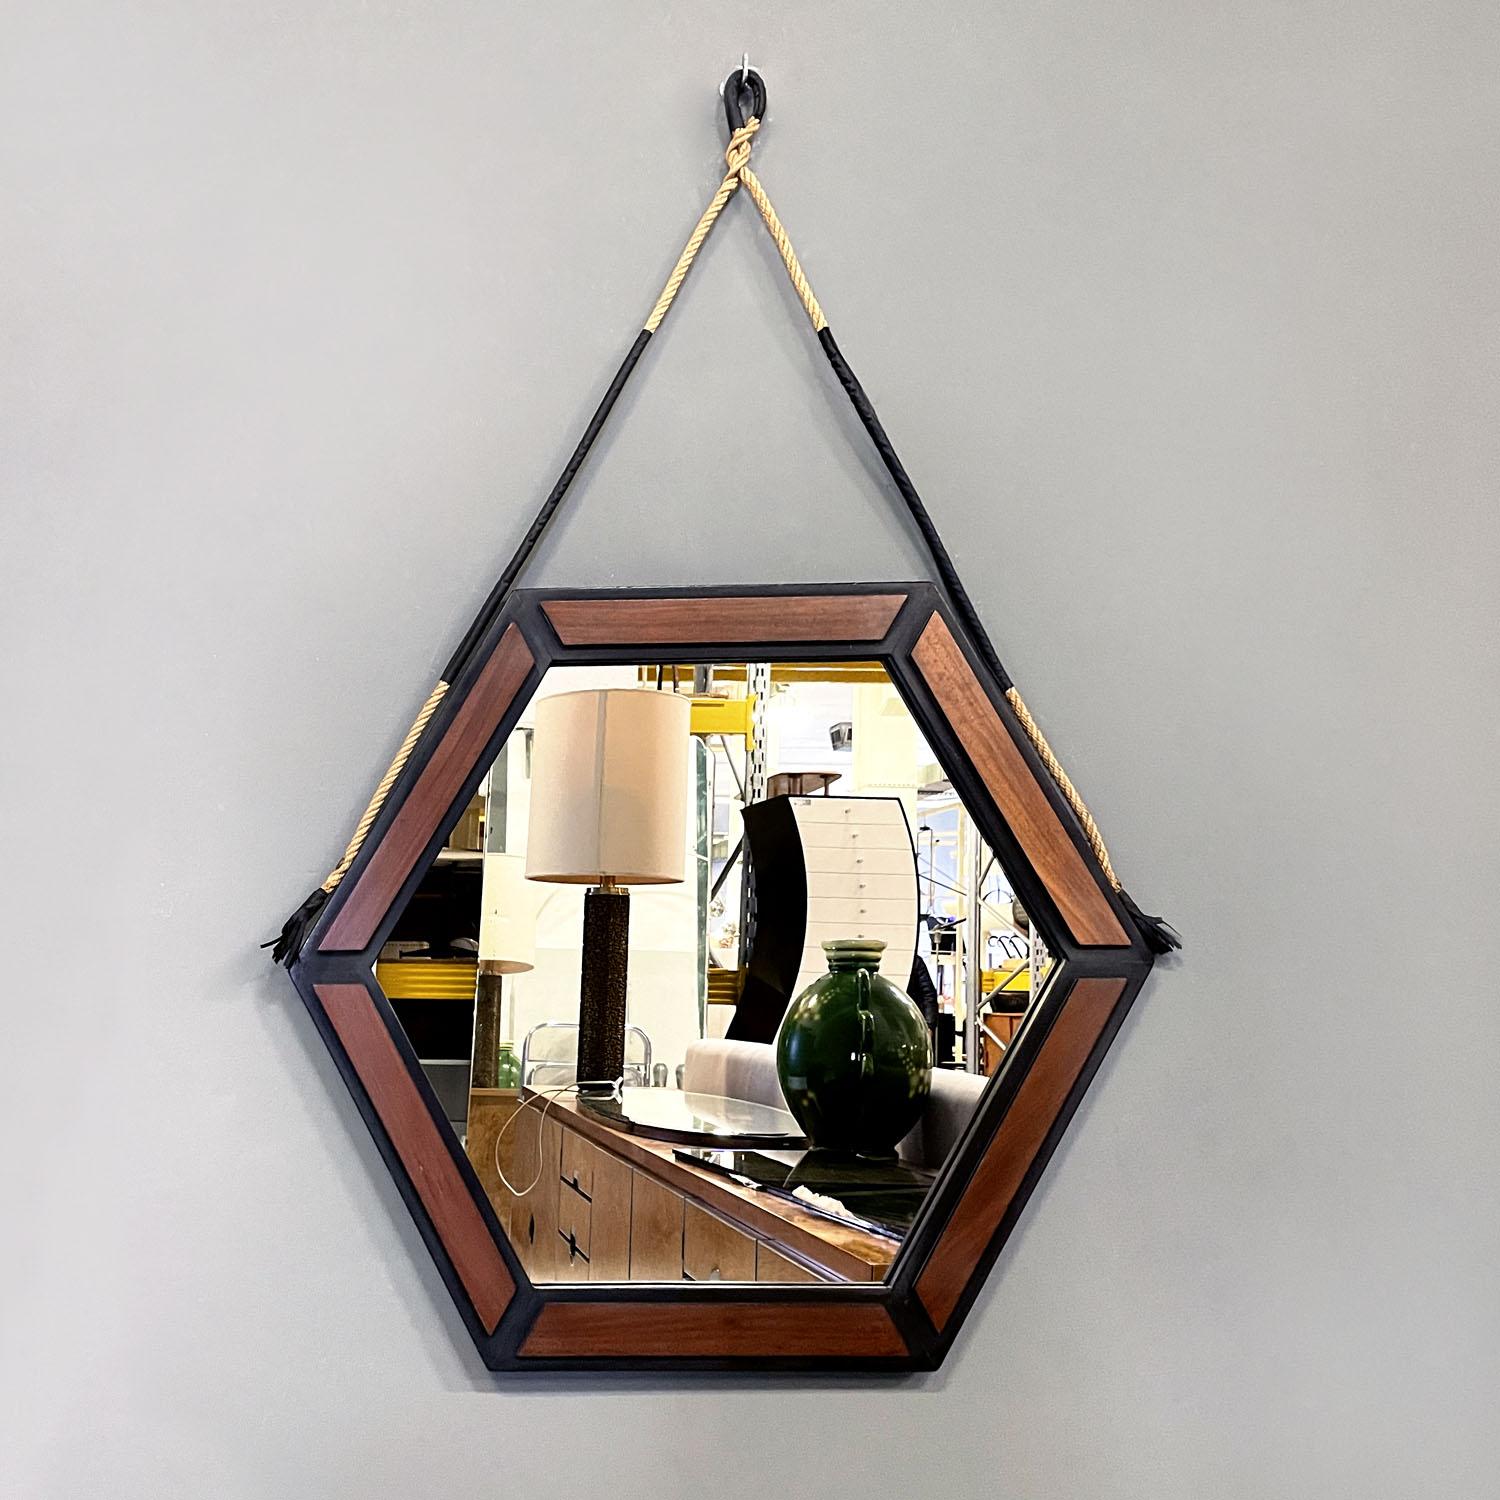 Italian mid-century modern hexagonal wooden wall mirror with rope, 1960s
Hexagonal wooden wall mirror. The frame is licked black with a matte finish, on each side of the hexagon there are six smaller wooden hexagons applied on top, to create a